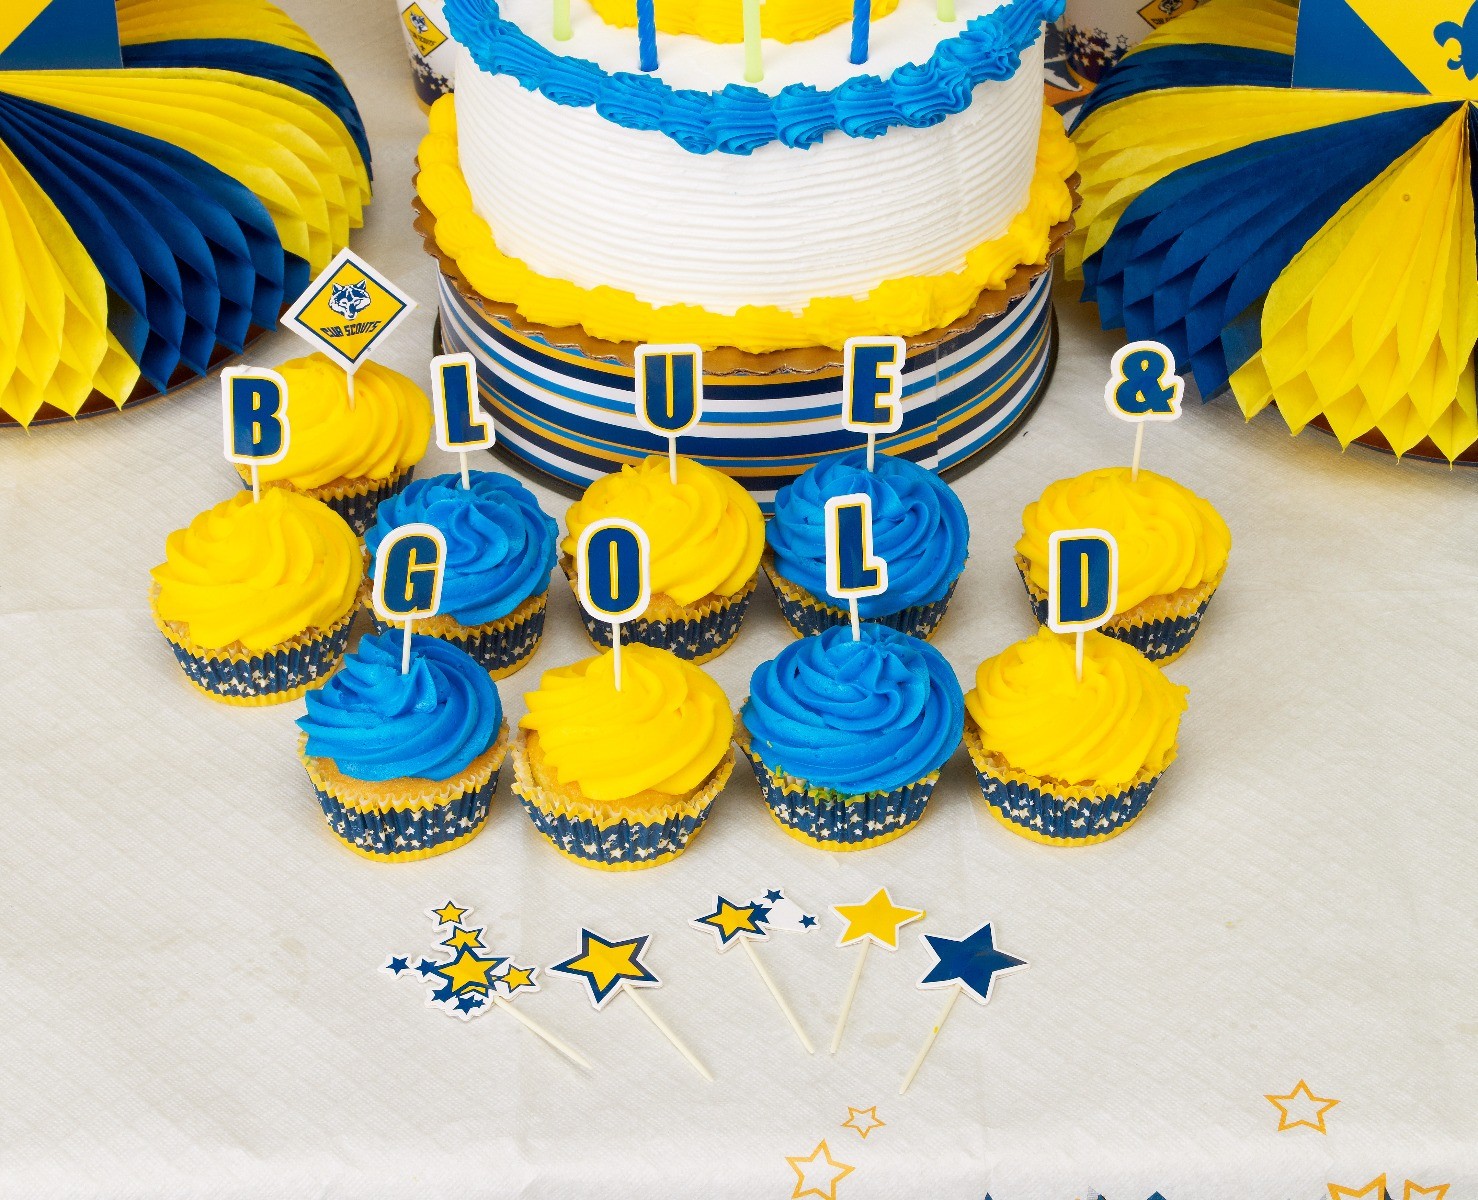 Blue and Gold details